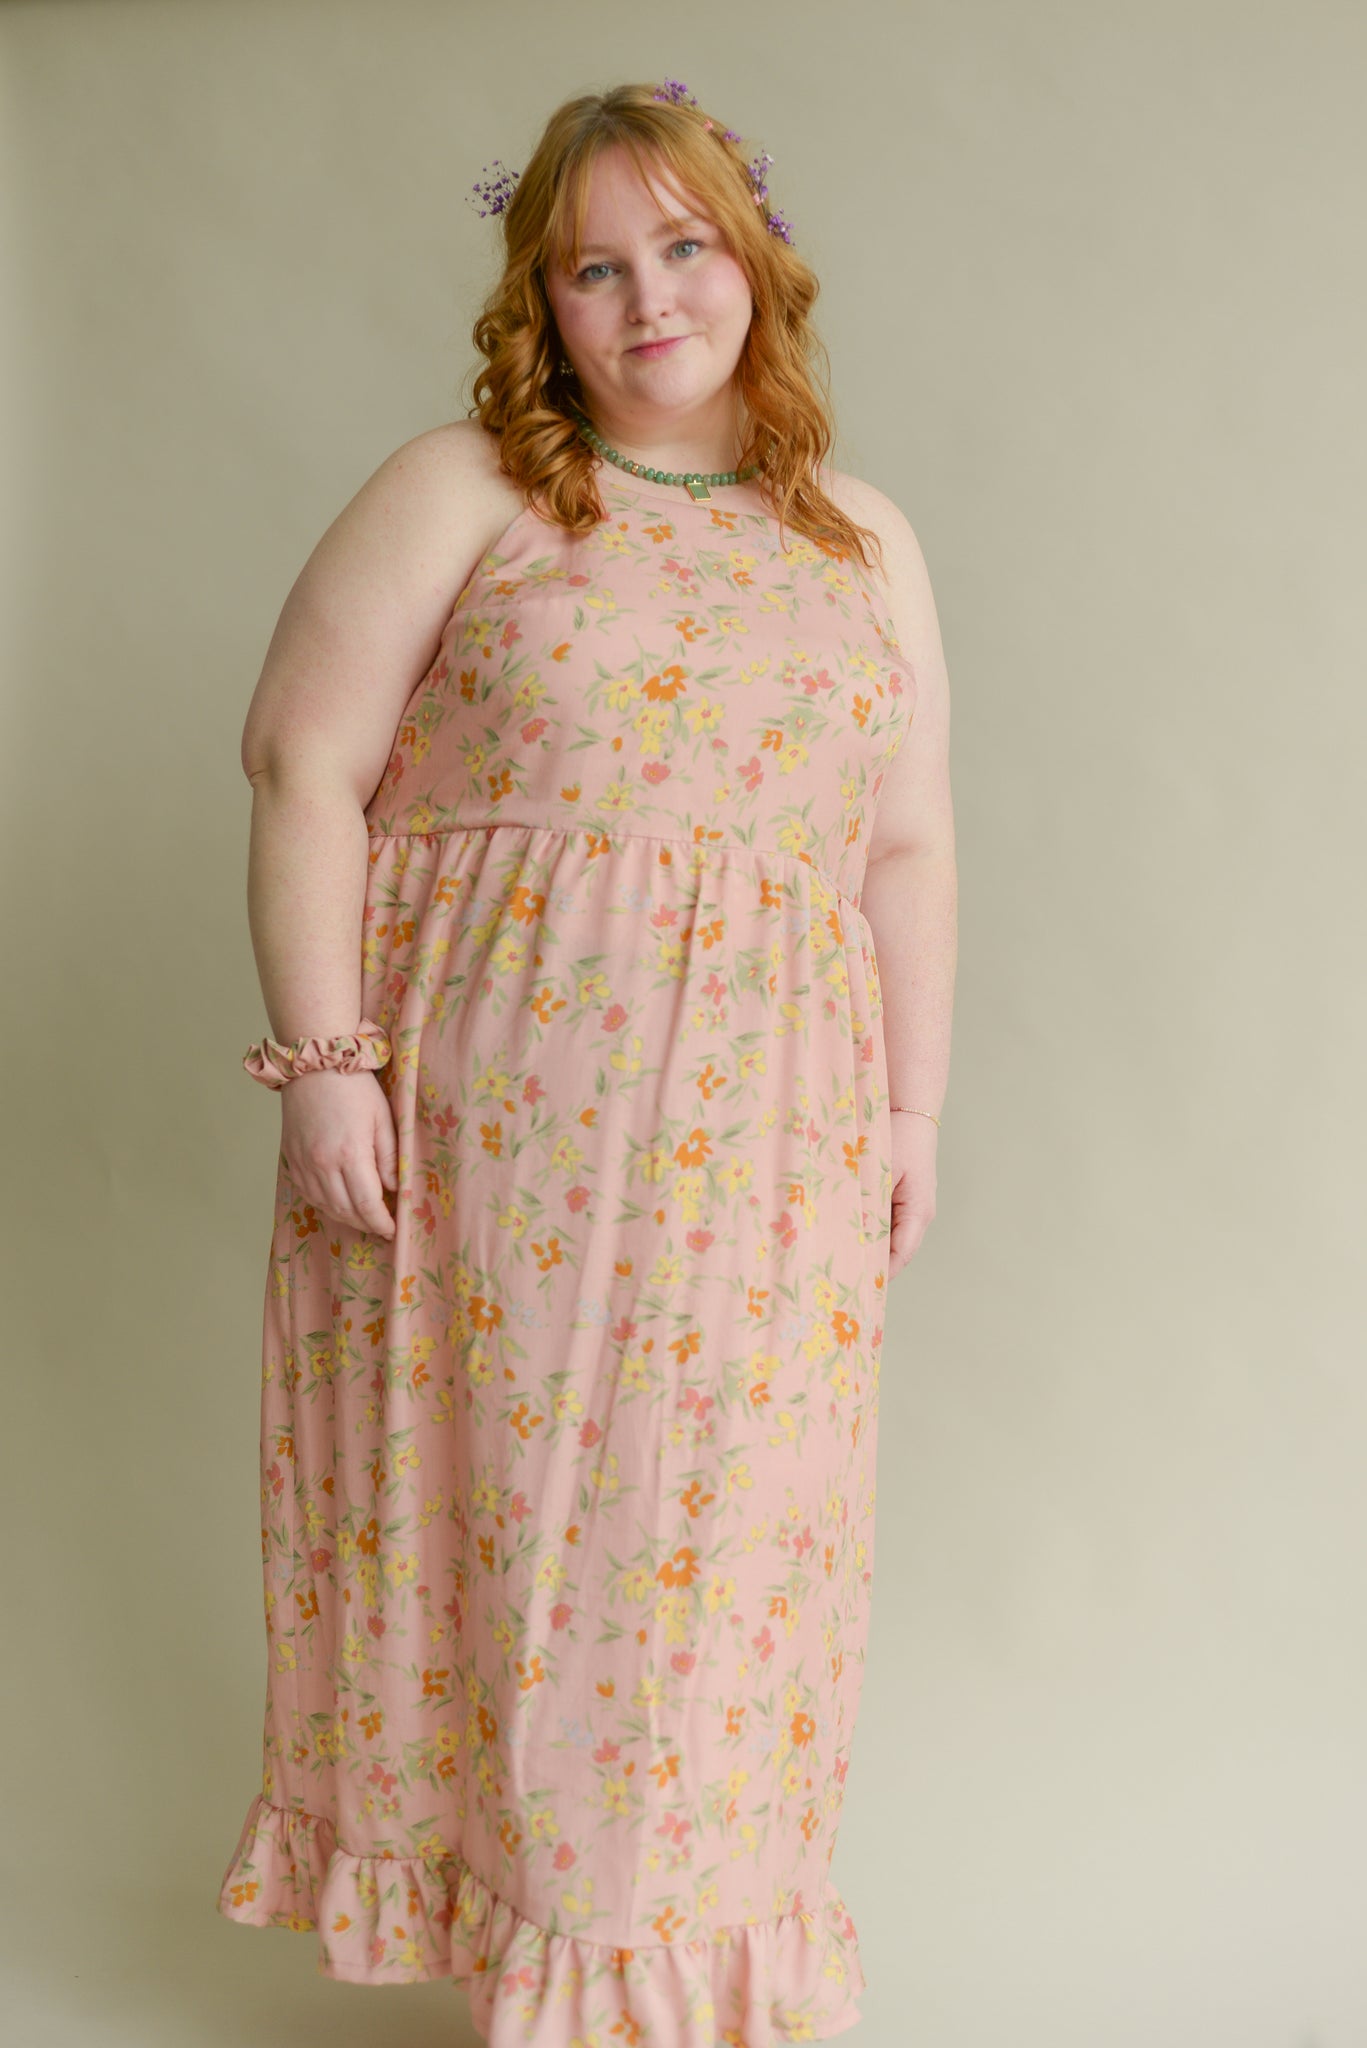 plus size model wearing a soft pink long tank top dress with a floral print